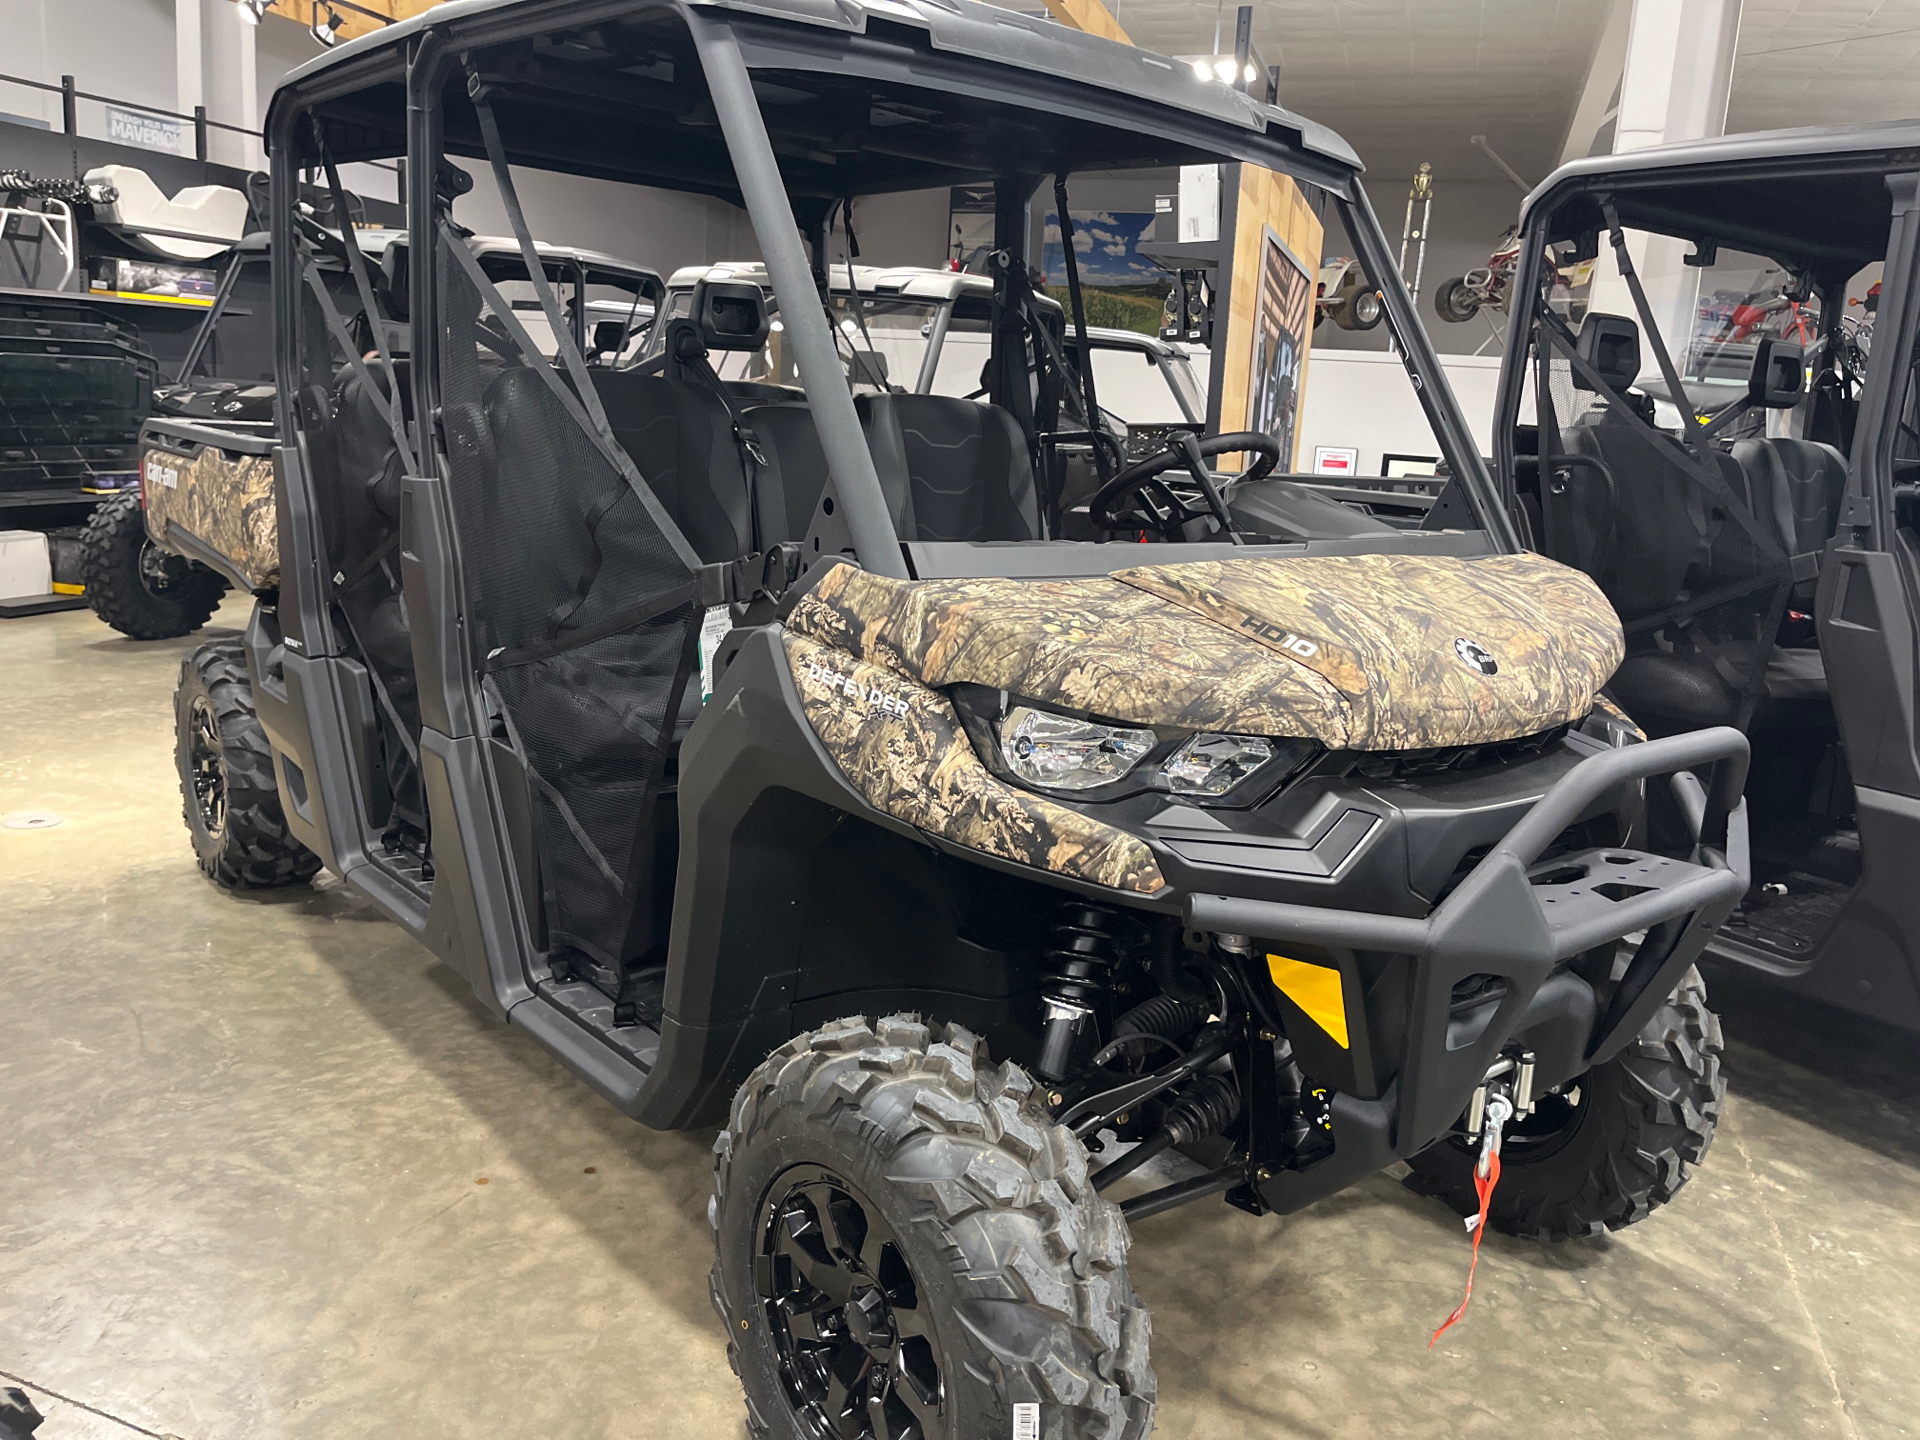 2023 Can-Am Defender MAX XT HD10 in Leland, Mississippi - Photo 1